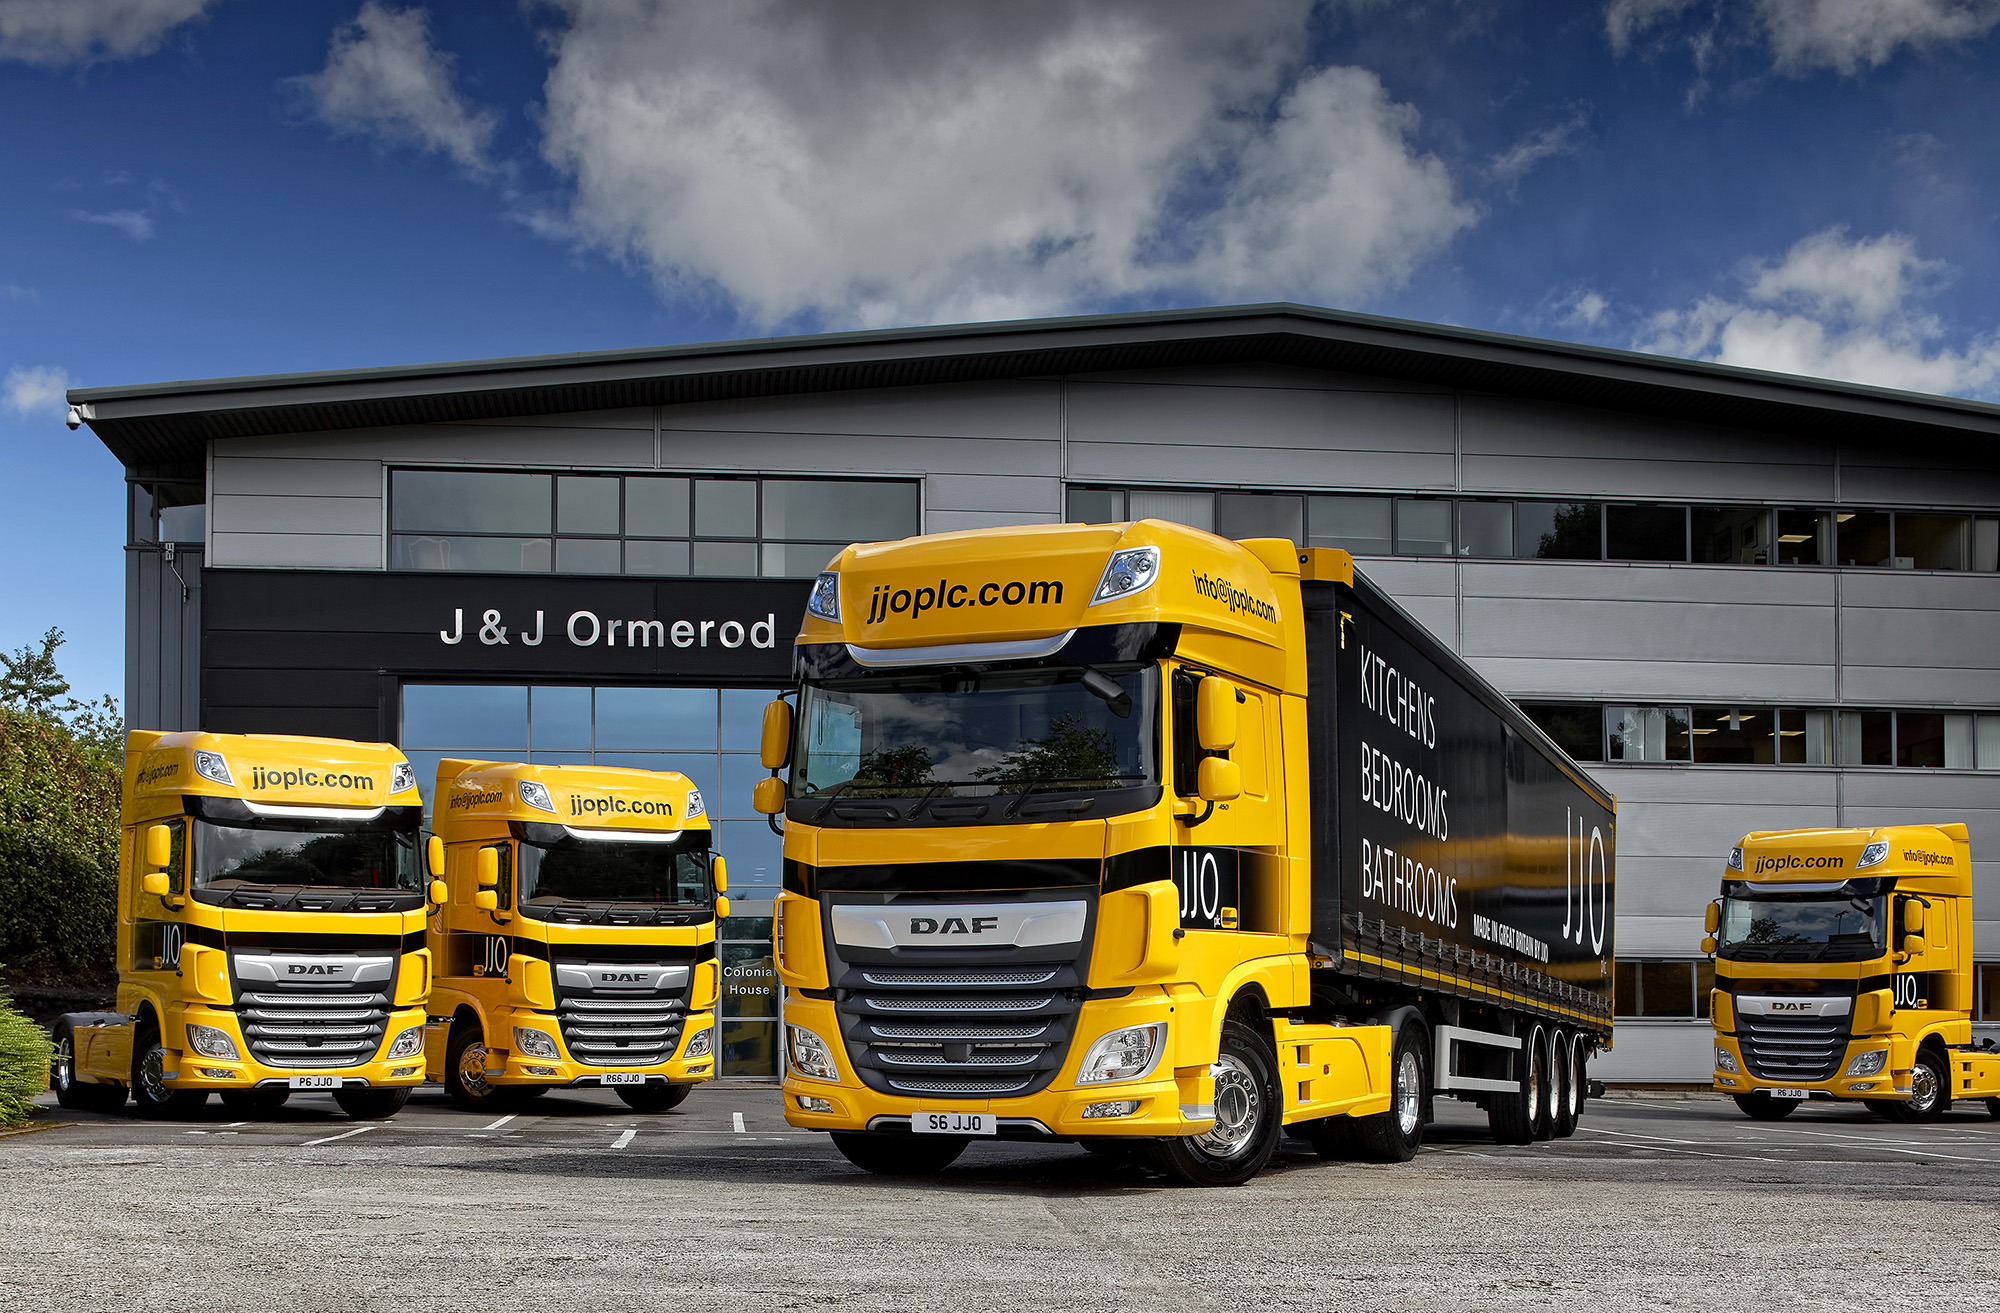 JJO DAF Vehicle Investment - Four new DAF Tractor Units in 250k spend